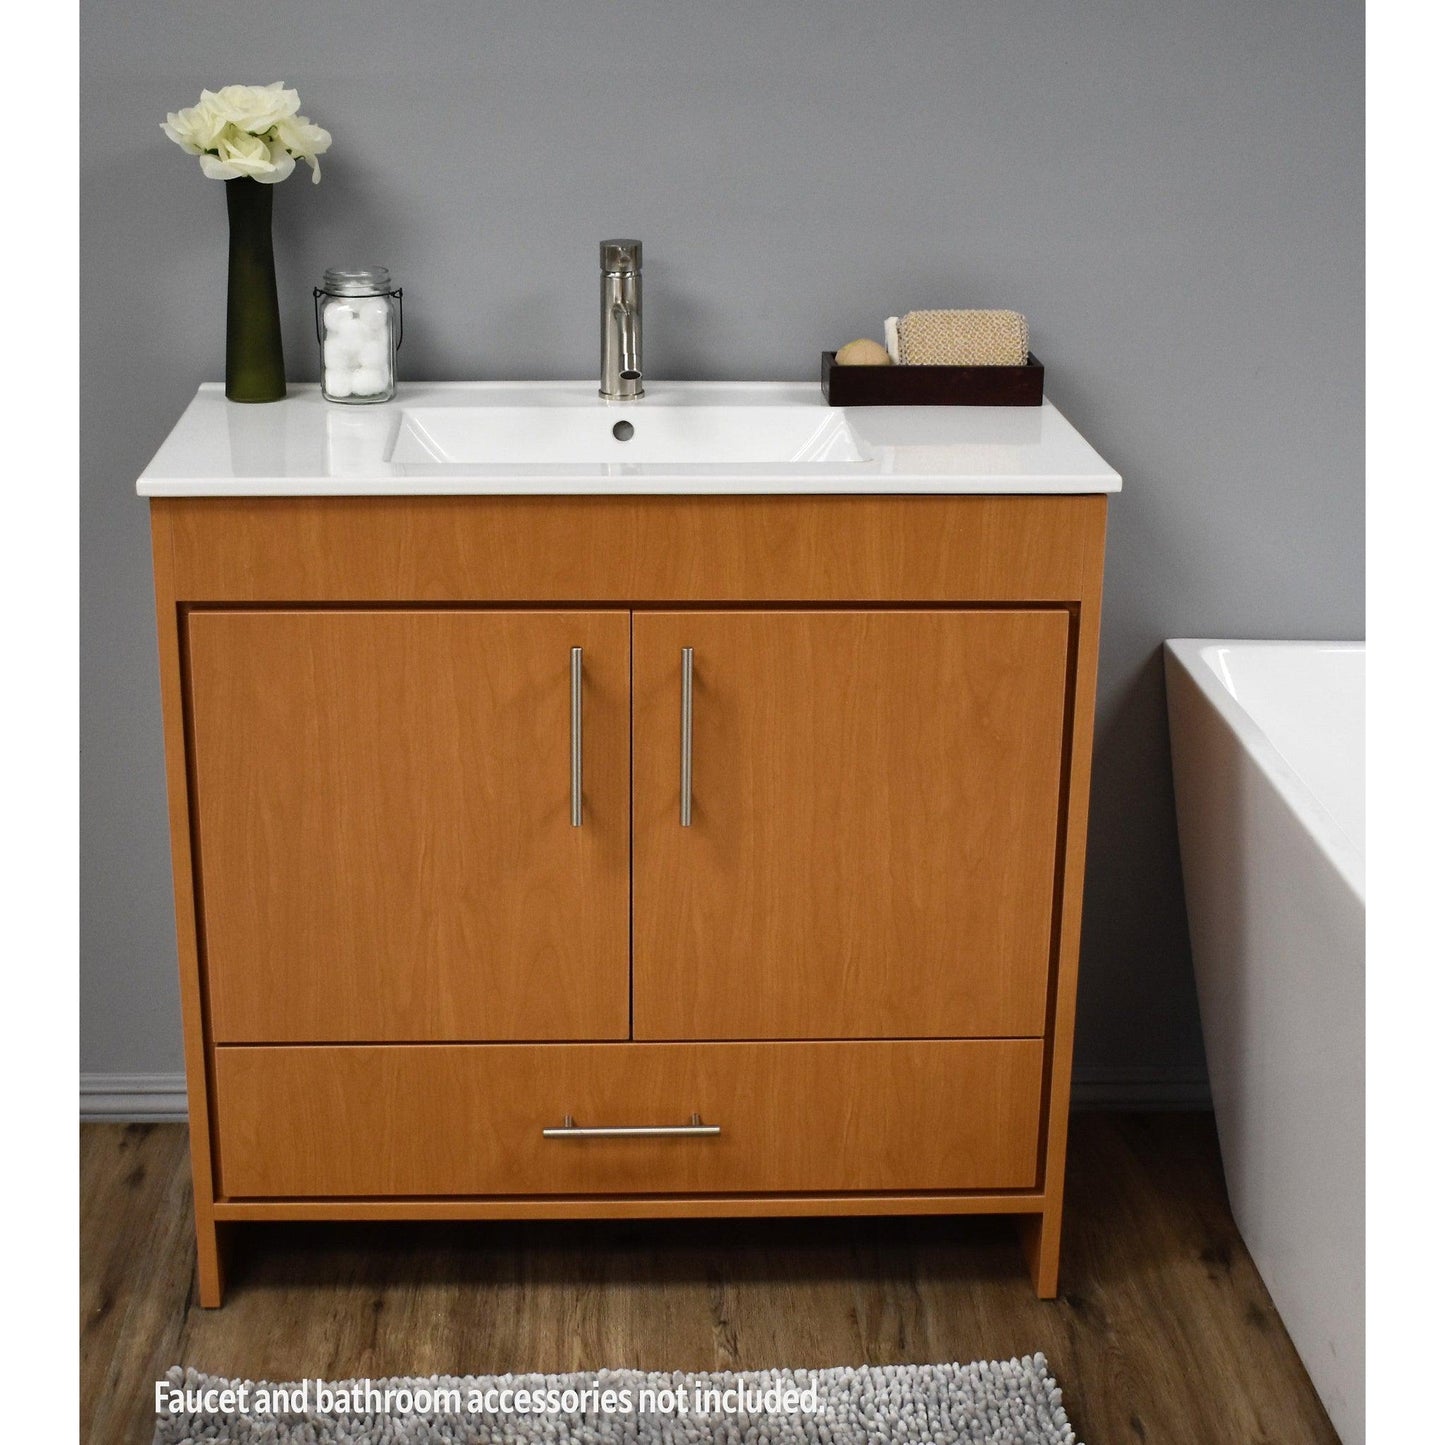 Volpa USA Pacific 36" Honey Maple Freestanding Modern Bathroom Vanity With Integrated Ceramic Top and Brushed Nickel Round Handles